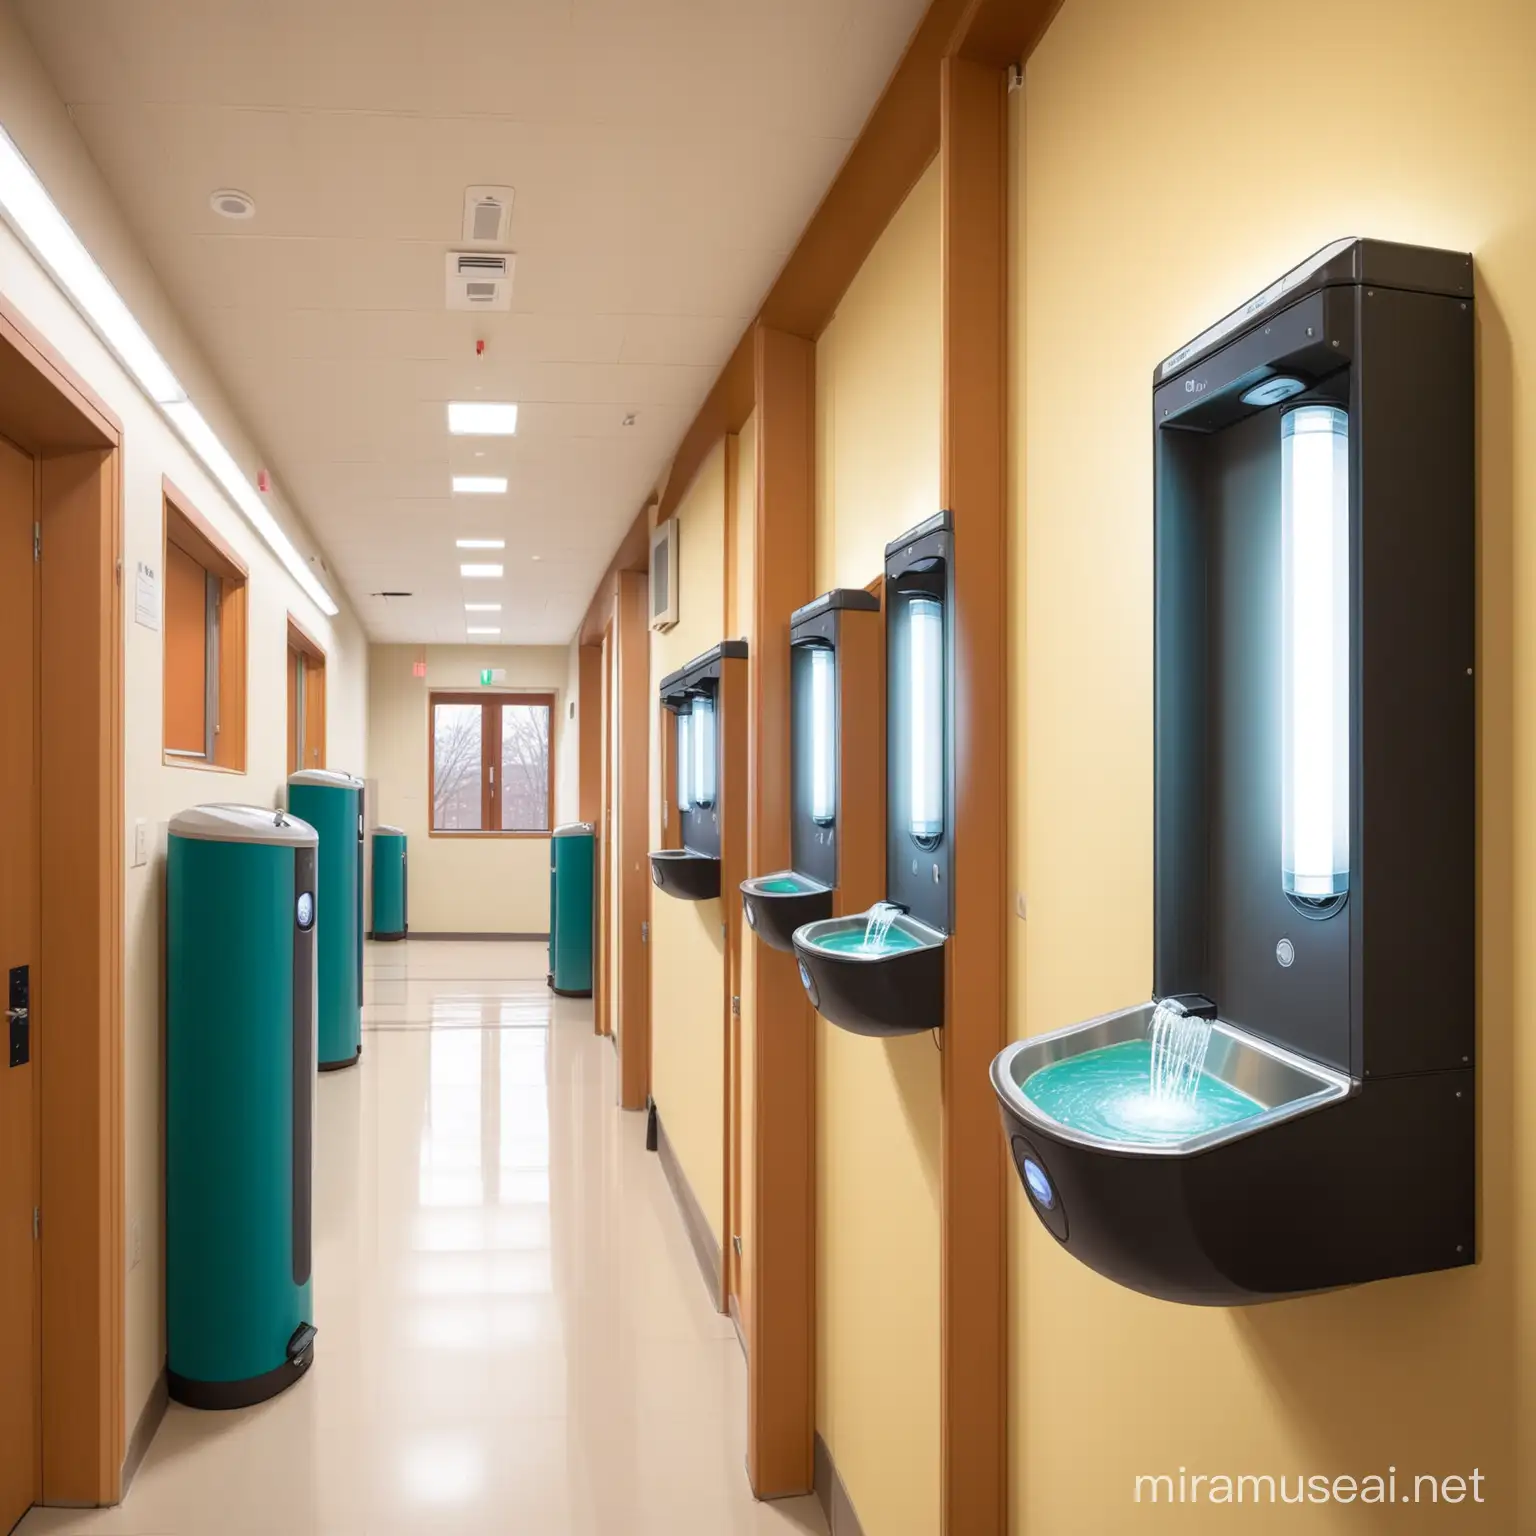  light sensors in dorm halls for sustainability, water fountains  in college,